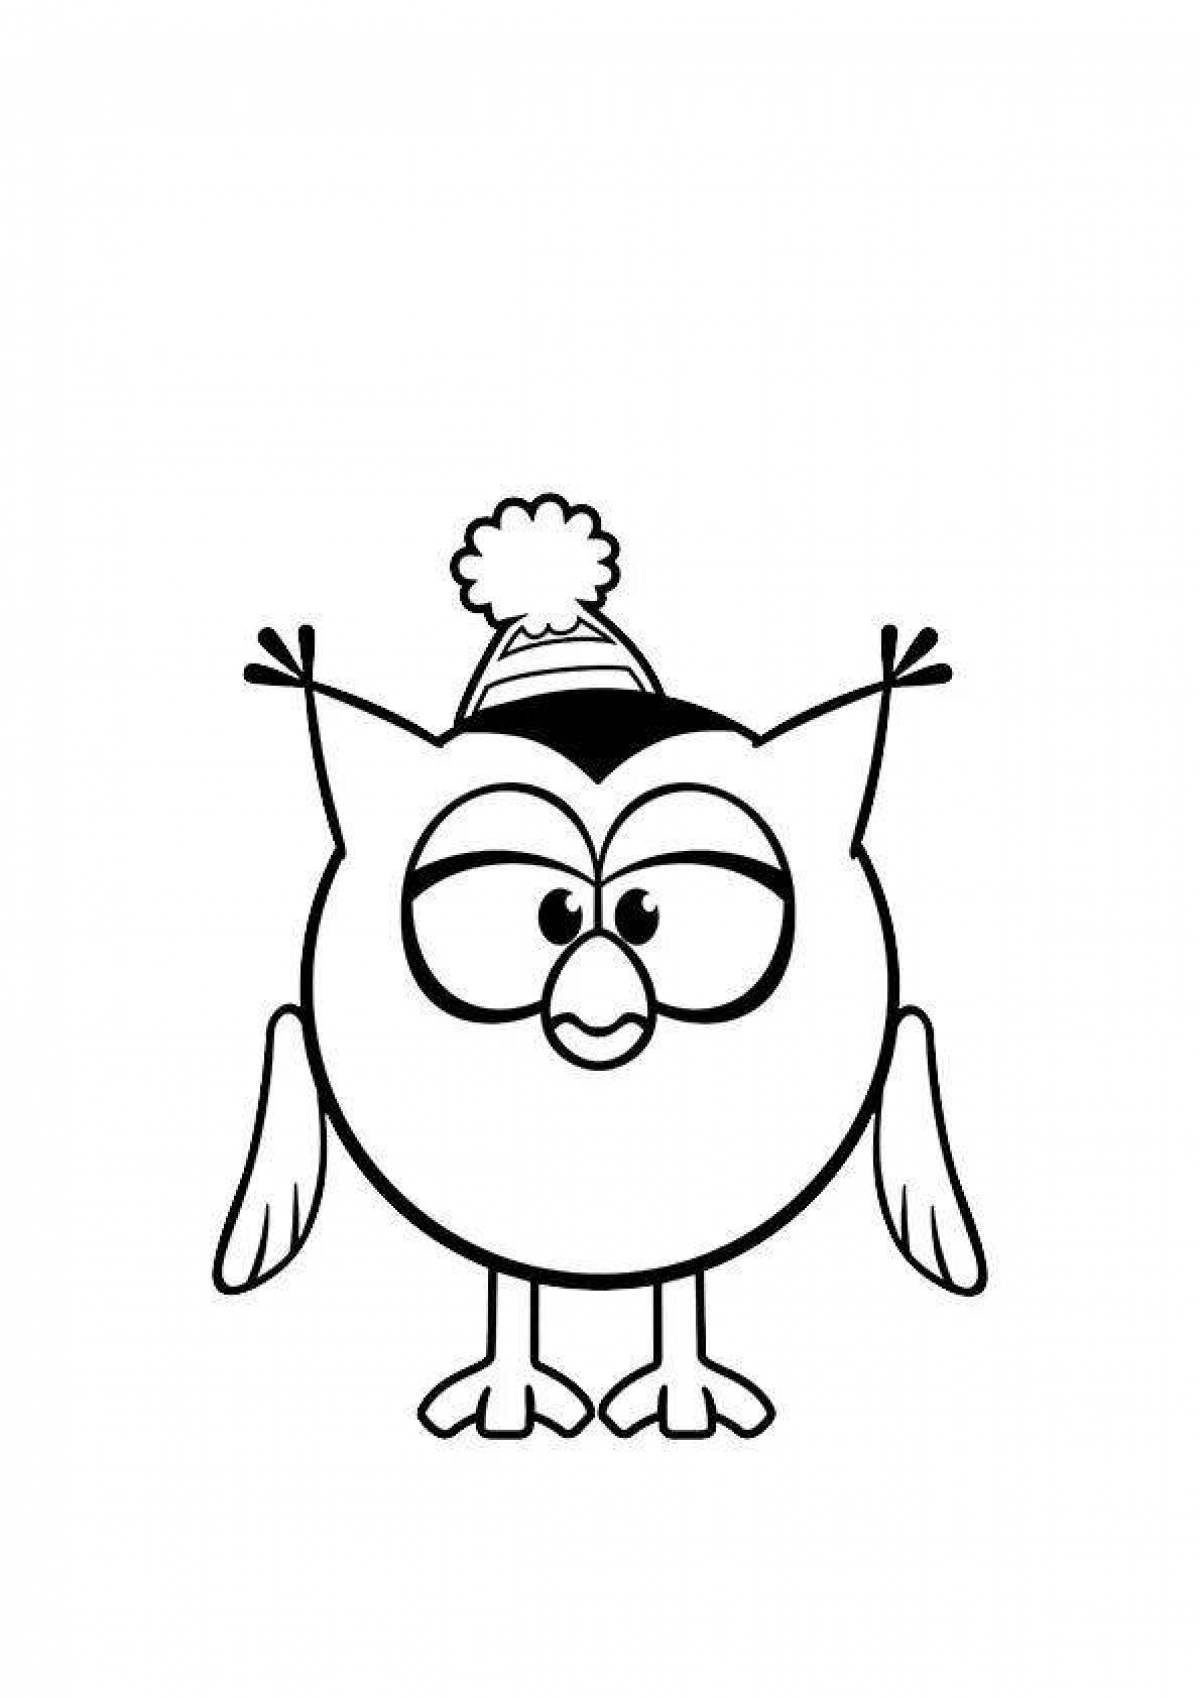 Majestic owl coloring book